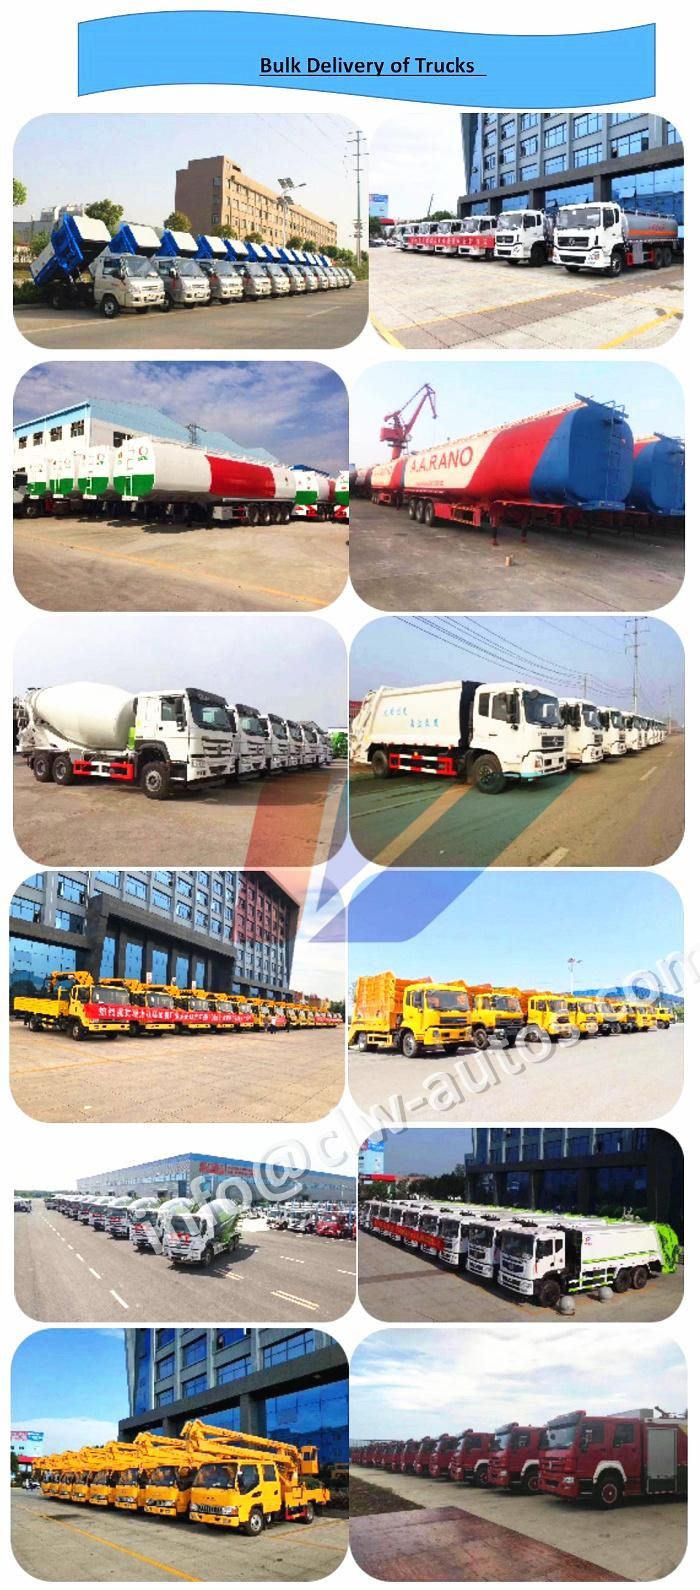 Chinese Famous Brand 4X2 5tons 6tons Refrigerator Freezer Cargo Truck Small Refrigerator Truck